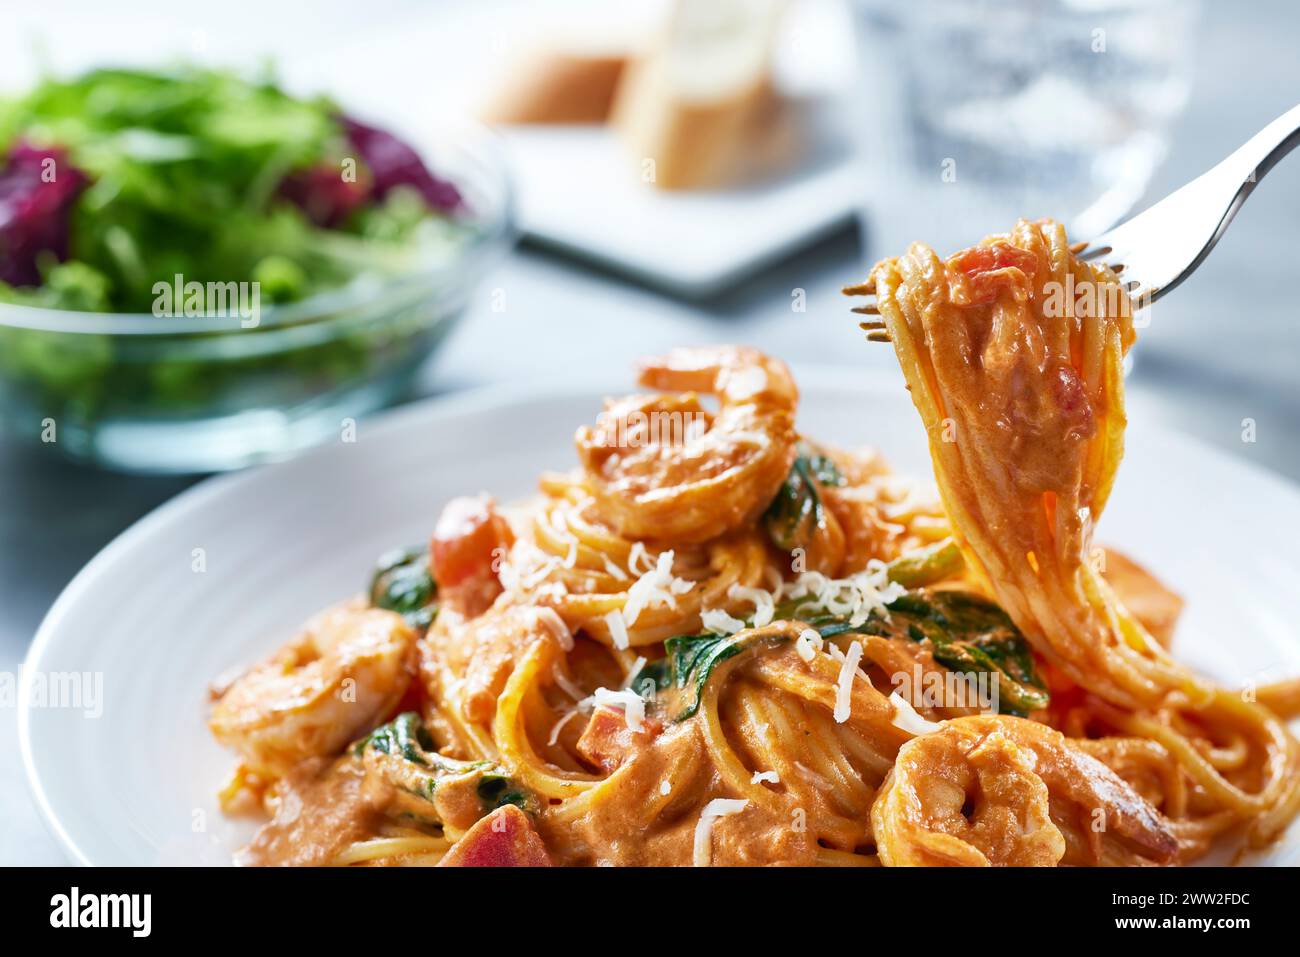 A plate of spaghetti with shrimp and spinach Stock Photo